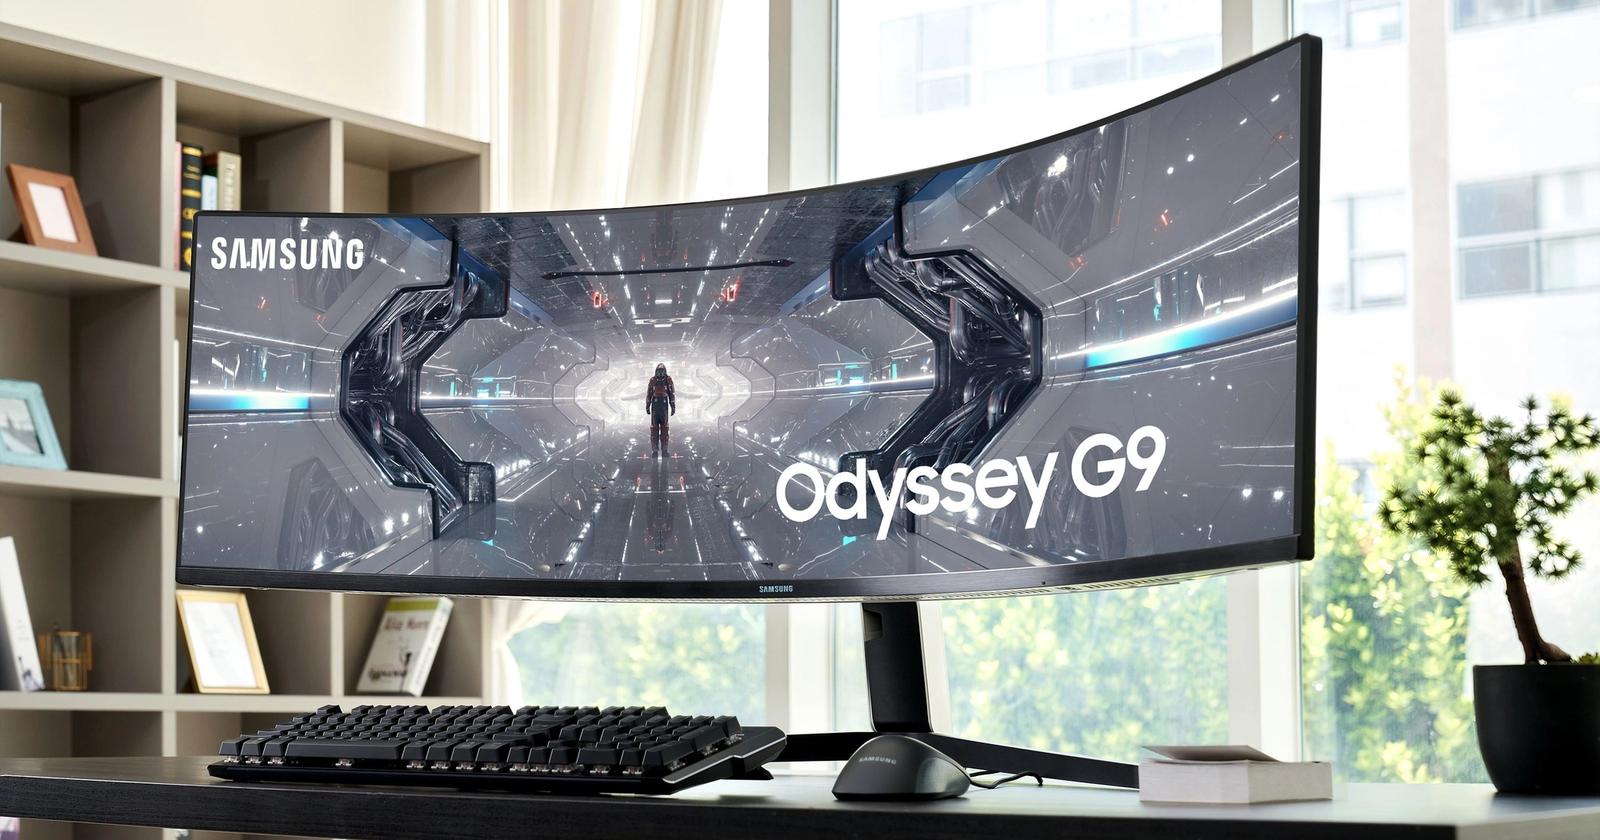 Odyssey G9: A futuristic gaming experience